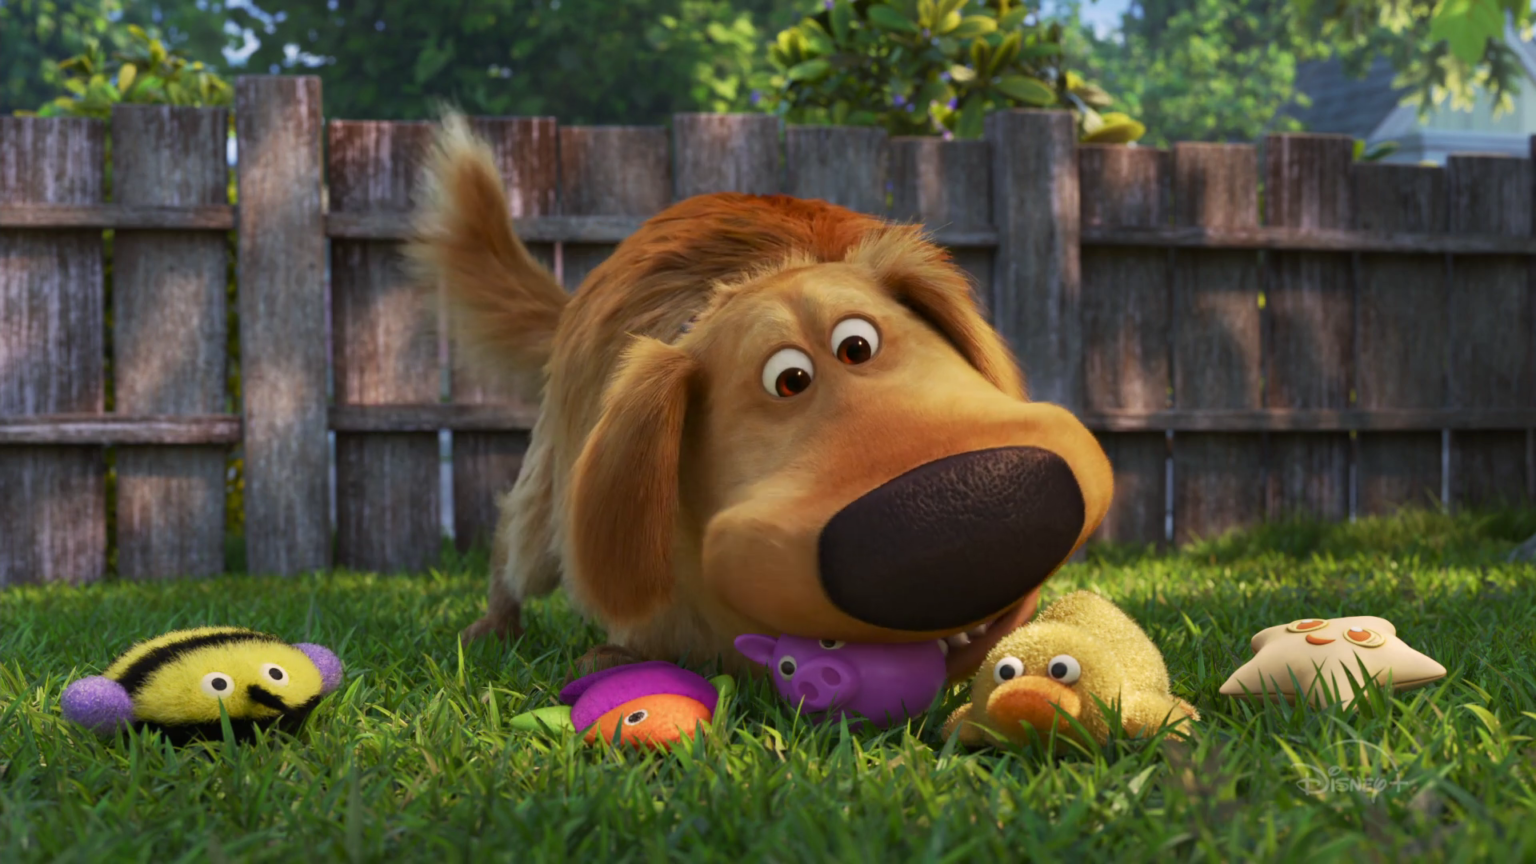 Dug Days A Downright Delightful Return To The World Of Up Upcoming Pixar